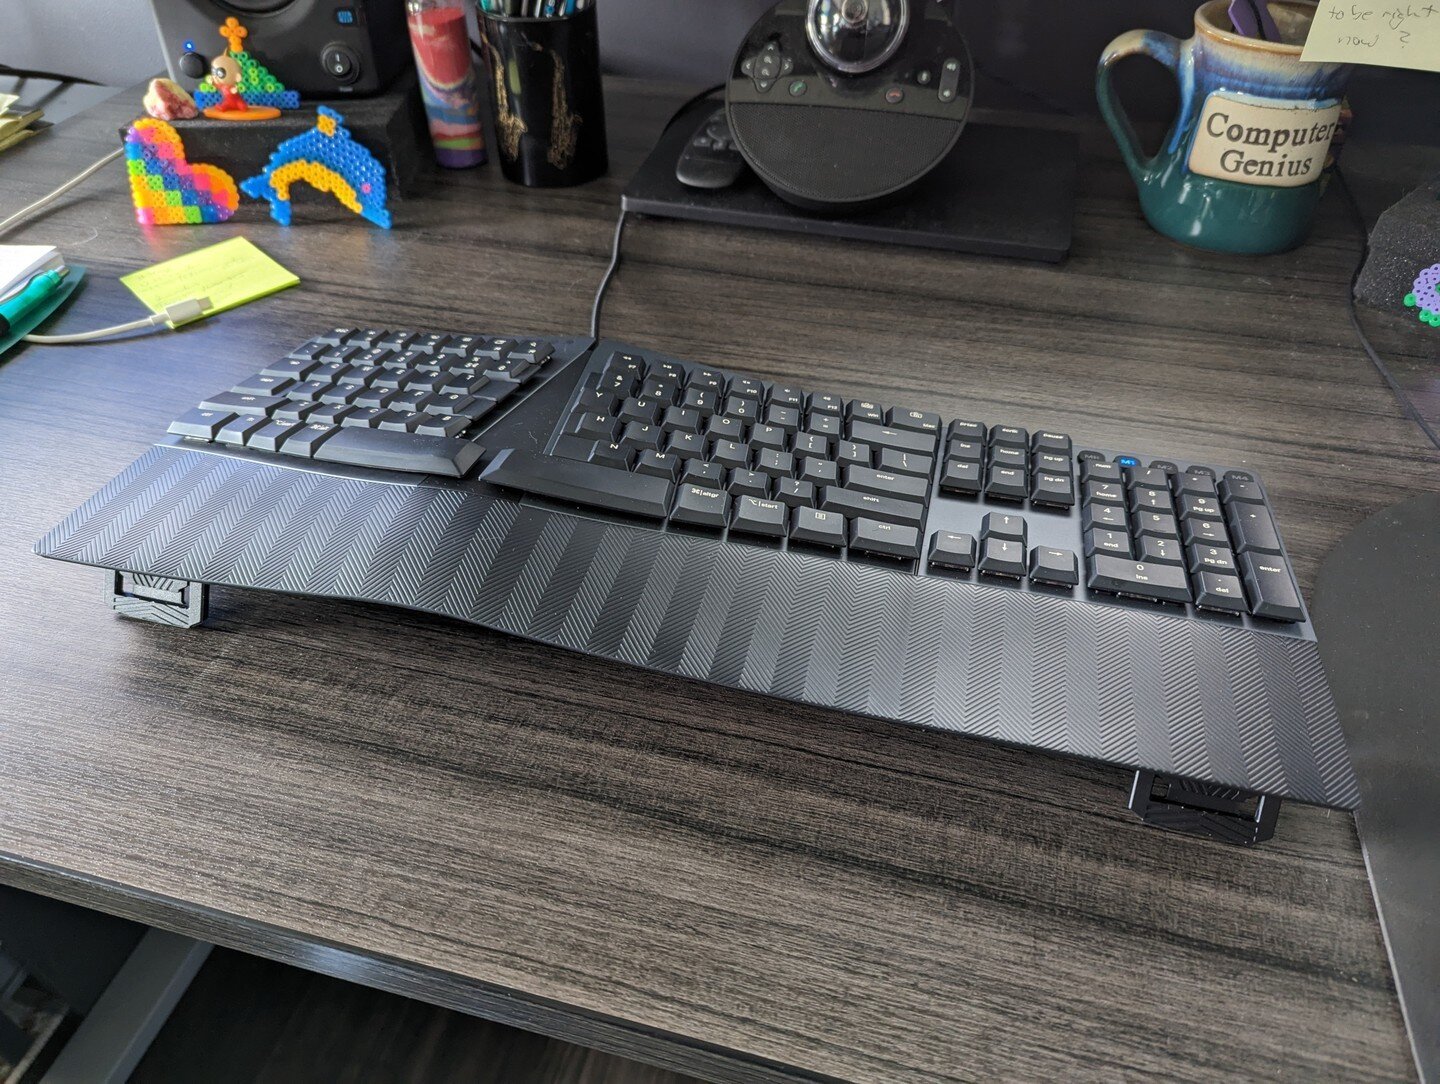 Always a big fan of the Microsoft Natural keyboard for the salvation of my wrists, the mushiness of the keys has left me wanting.  Enter the Perrix PERIBOARD-535!

I chose their &quot;brown&quot; switch option.  Natural ergonomics and mechanical clic